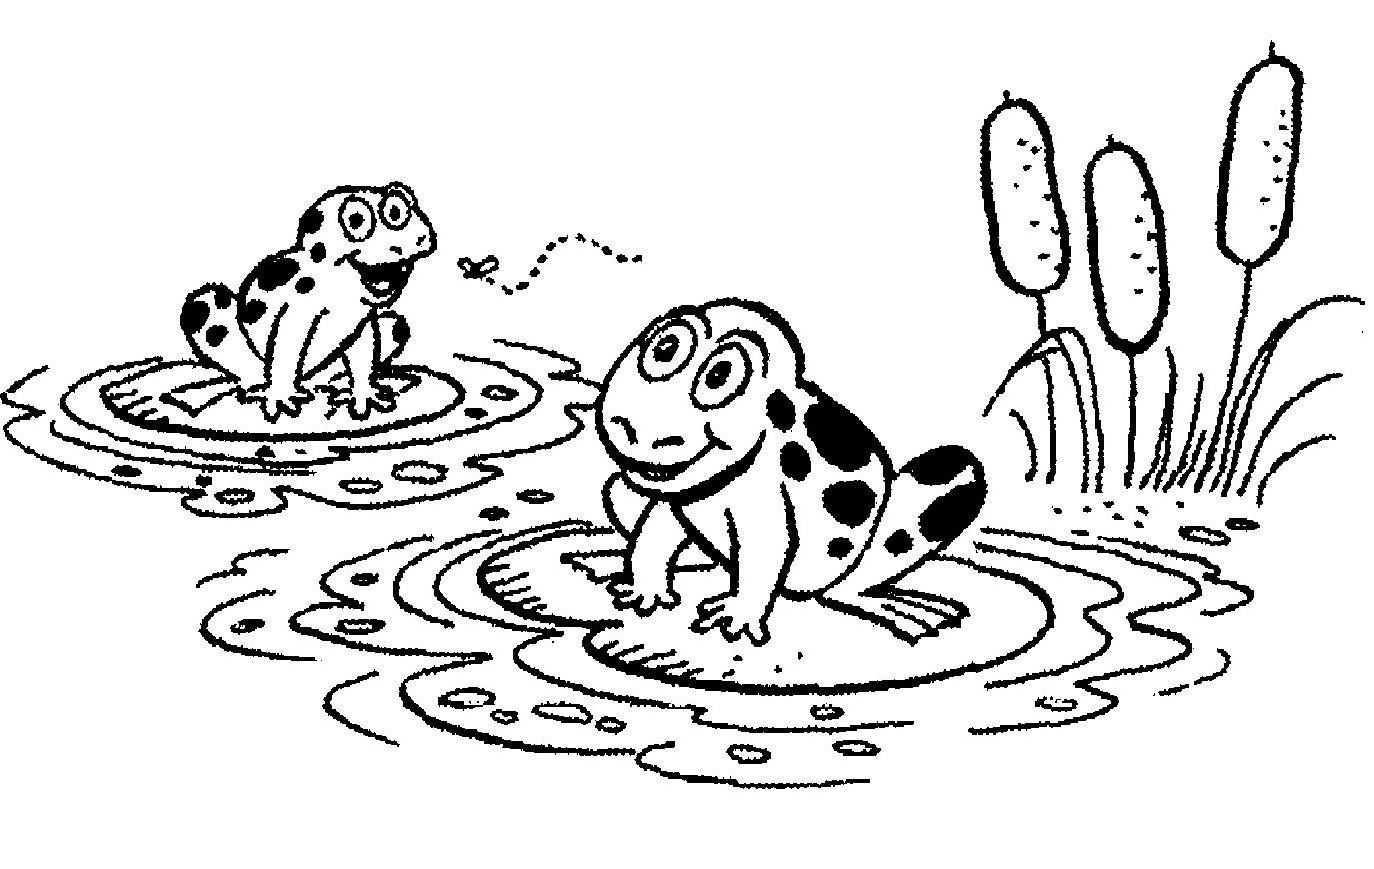 Frog black and white cute frog clip art black and white free ...